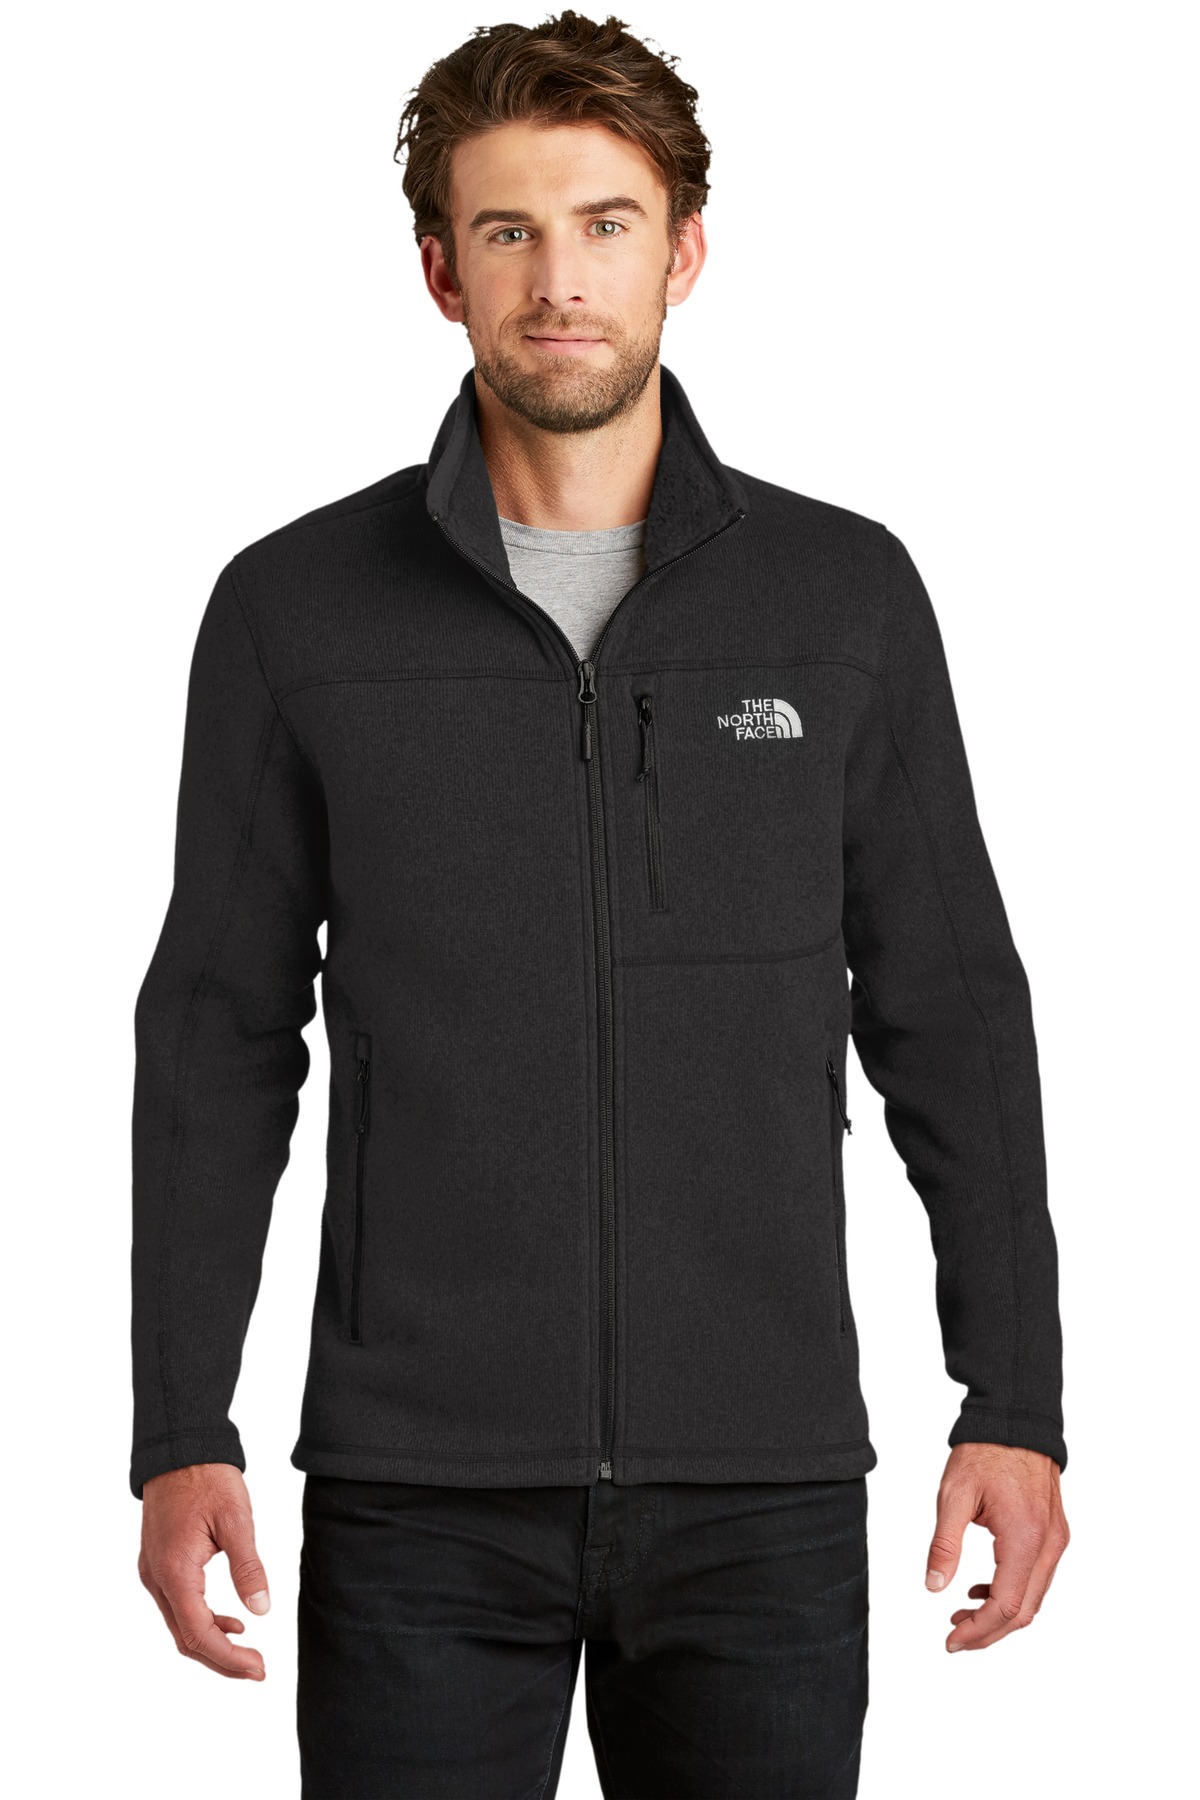 The North Face Sweater Fleece Jacket-The North Face